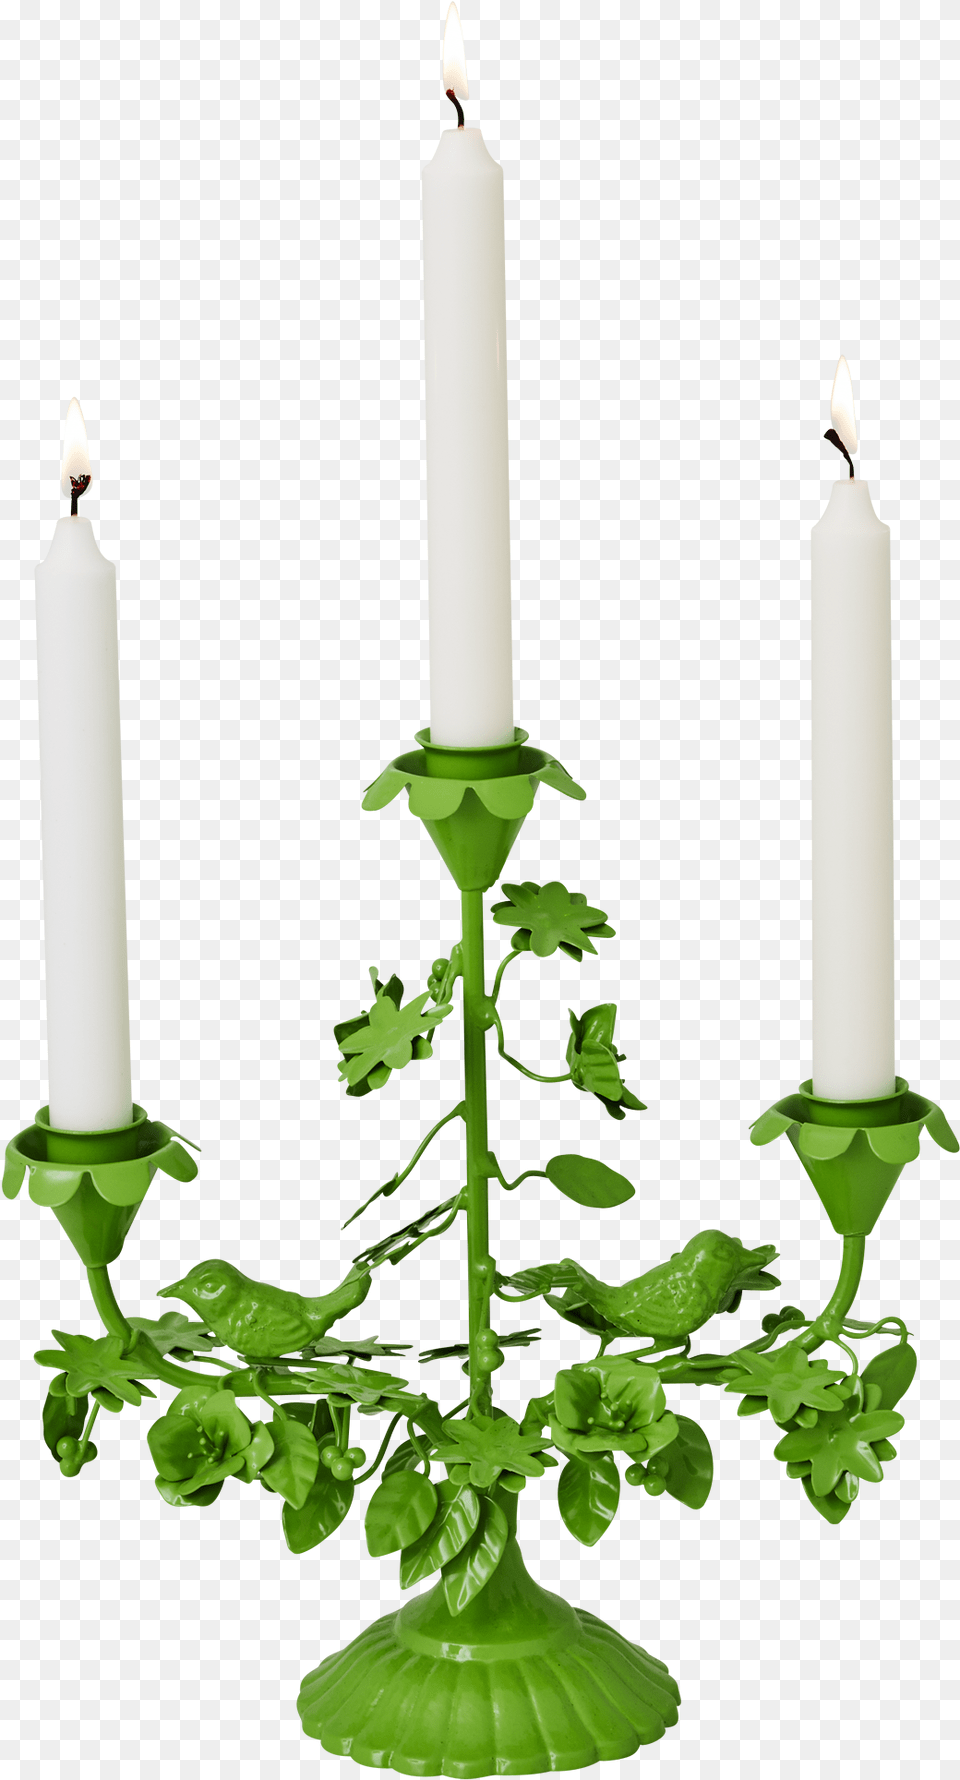 Green Metal Birds Amp Flowers 3 Arm Candle Holder Rice Meteorites Perles Detoile, Candlestick, Chandelier, Lamp Png